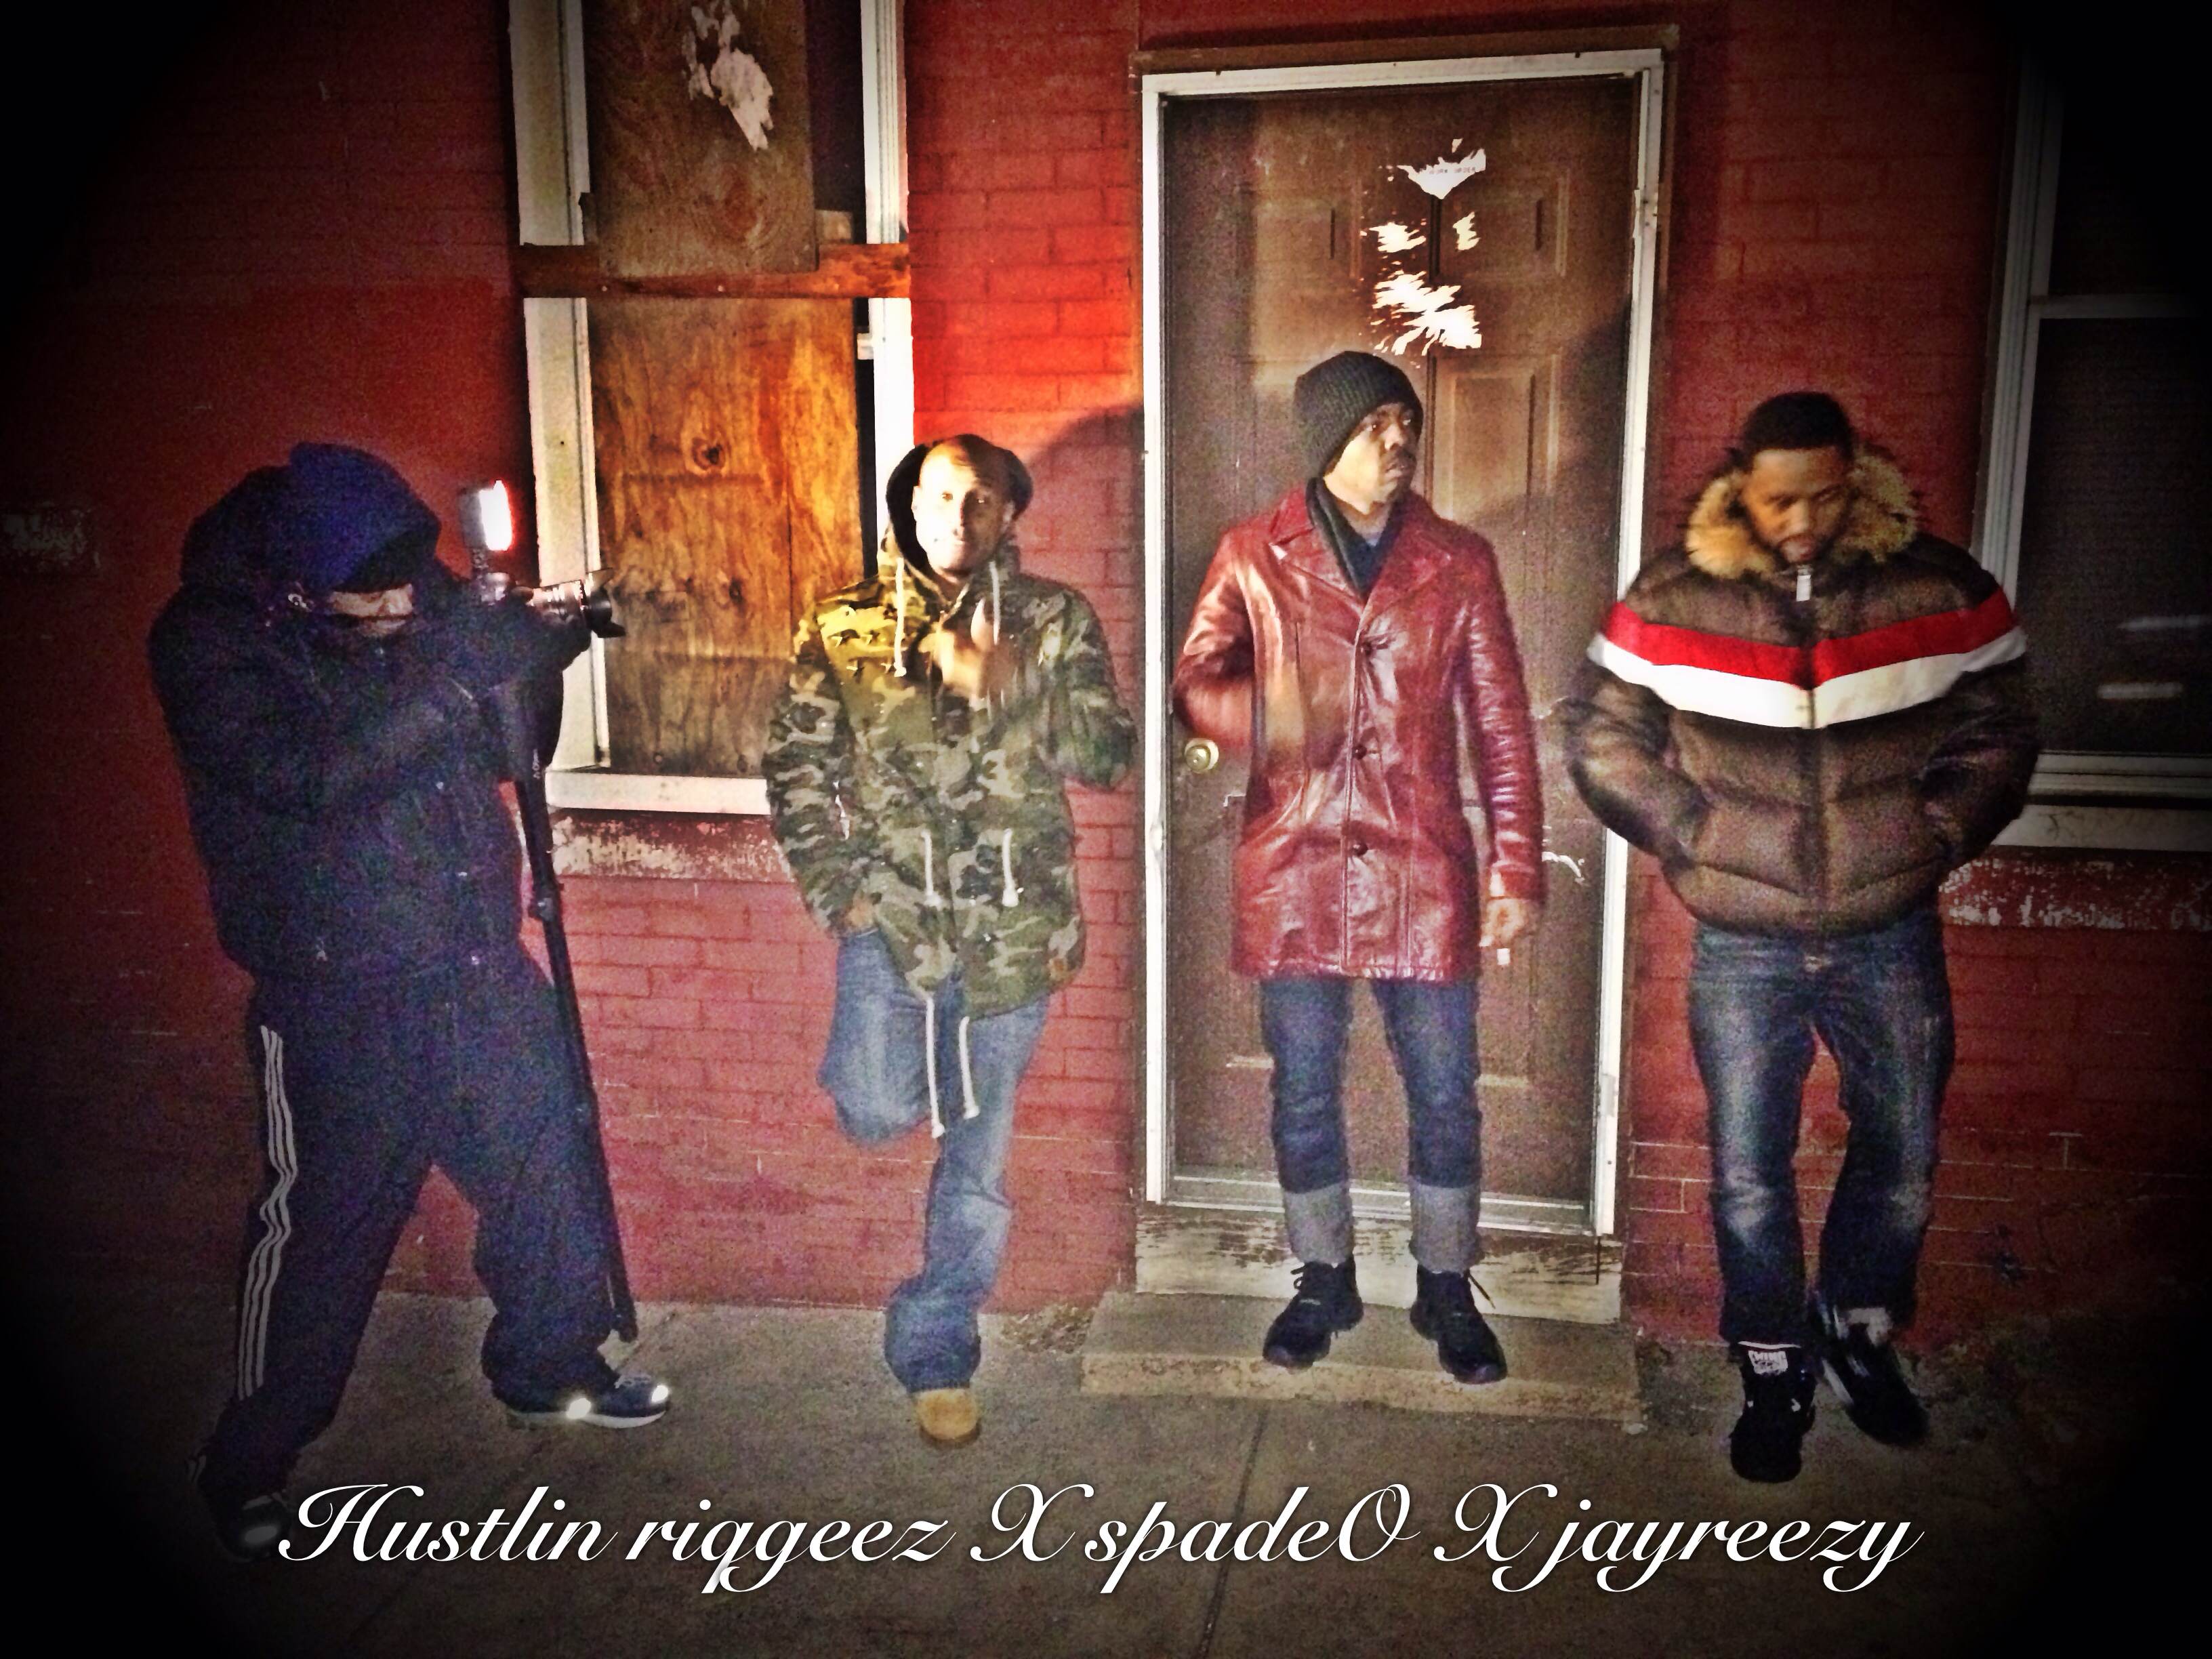 photo2 Riq Geez - Hustling Ft. Jay Reezy & Spade-O (Behind The Scenes Video)  